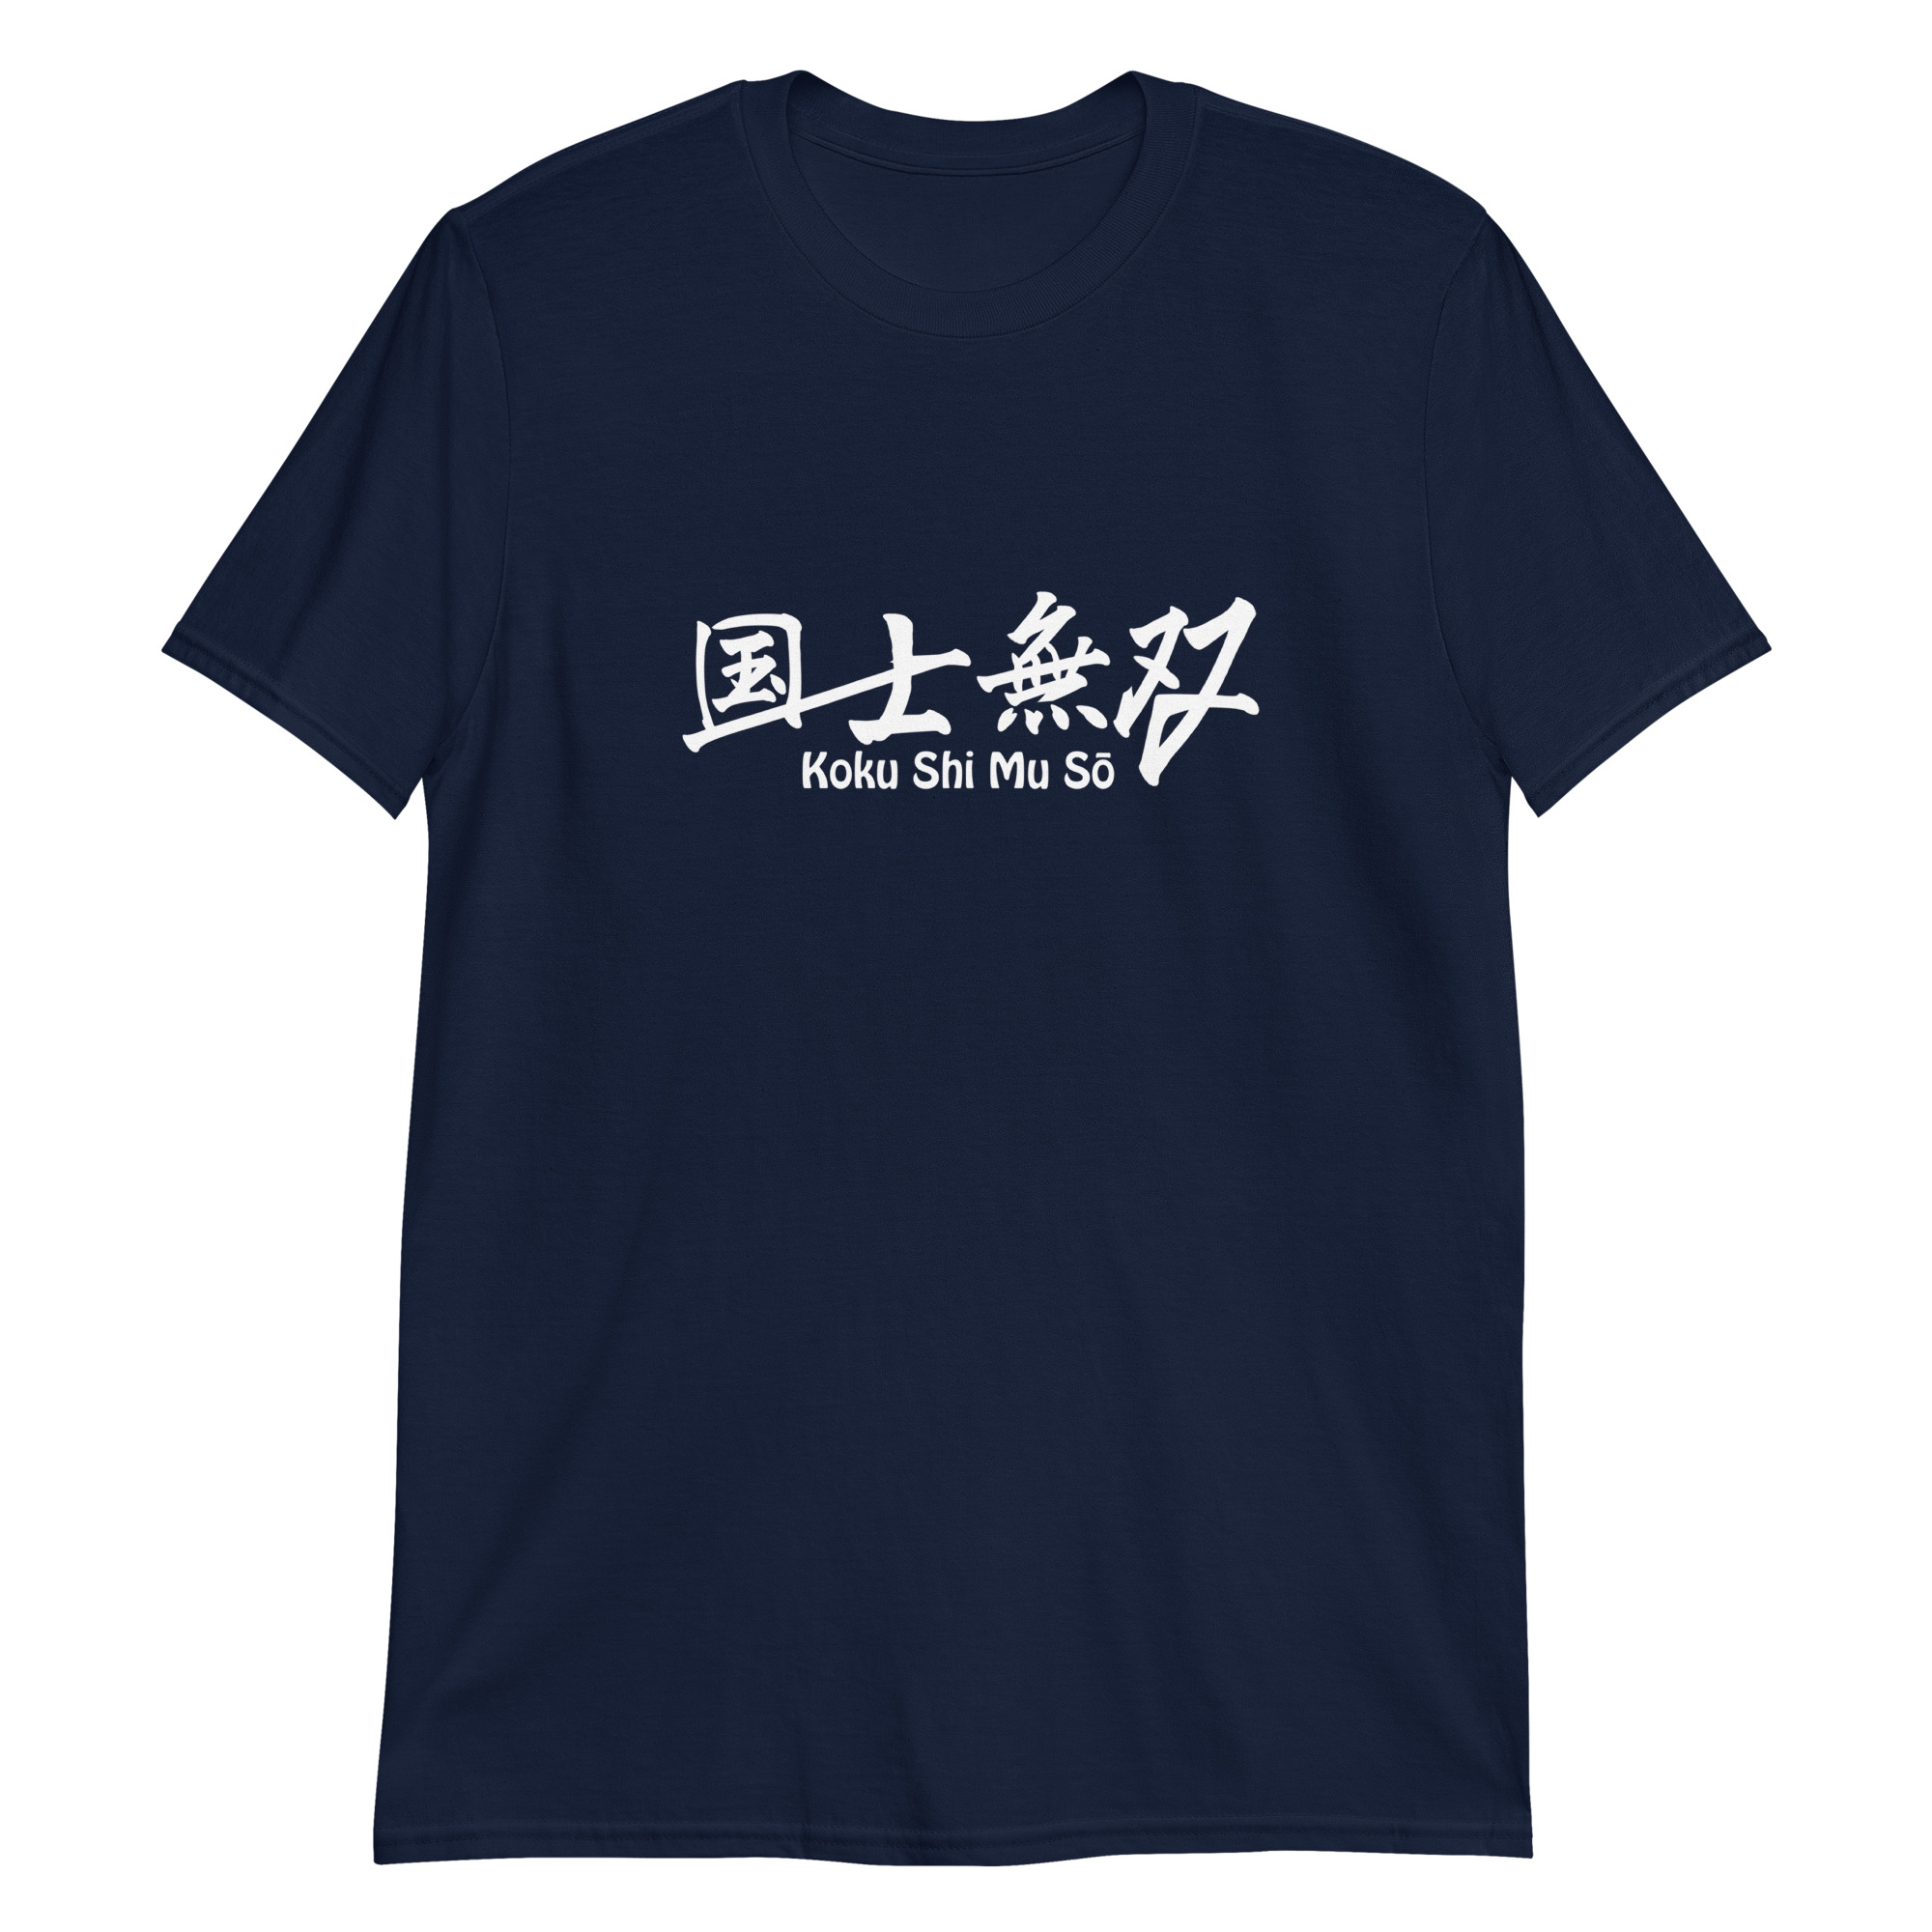 unisex-basic-softstyle-t-shirt-navy-front-6404aacef264a.jpg